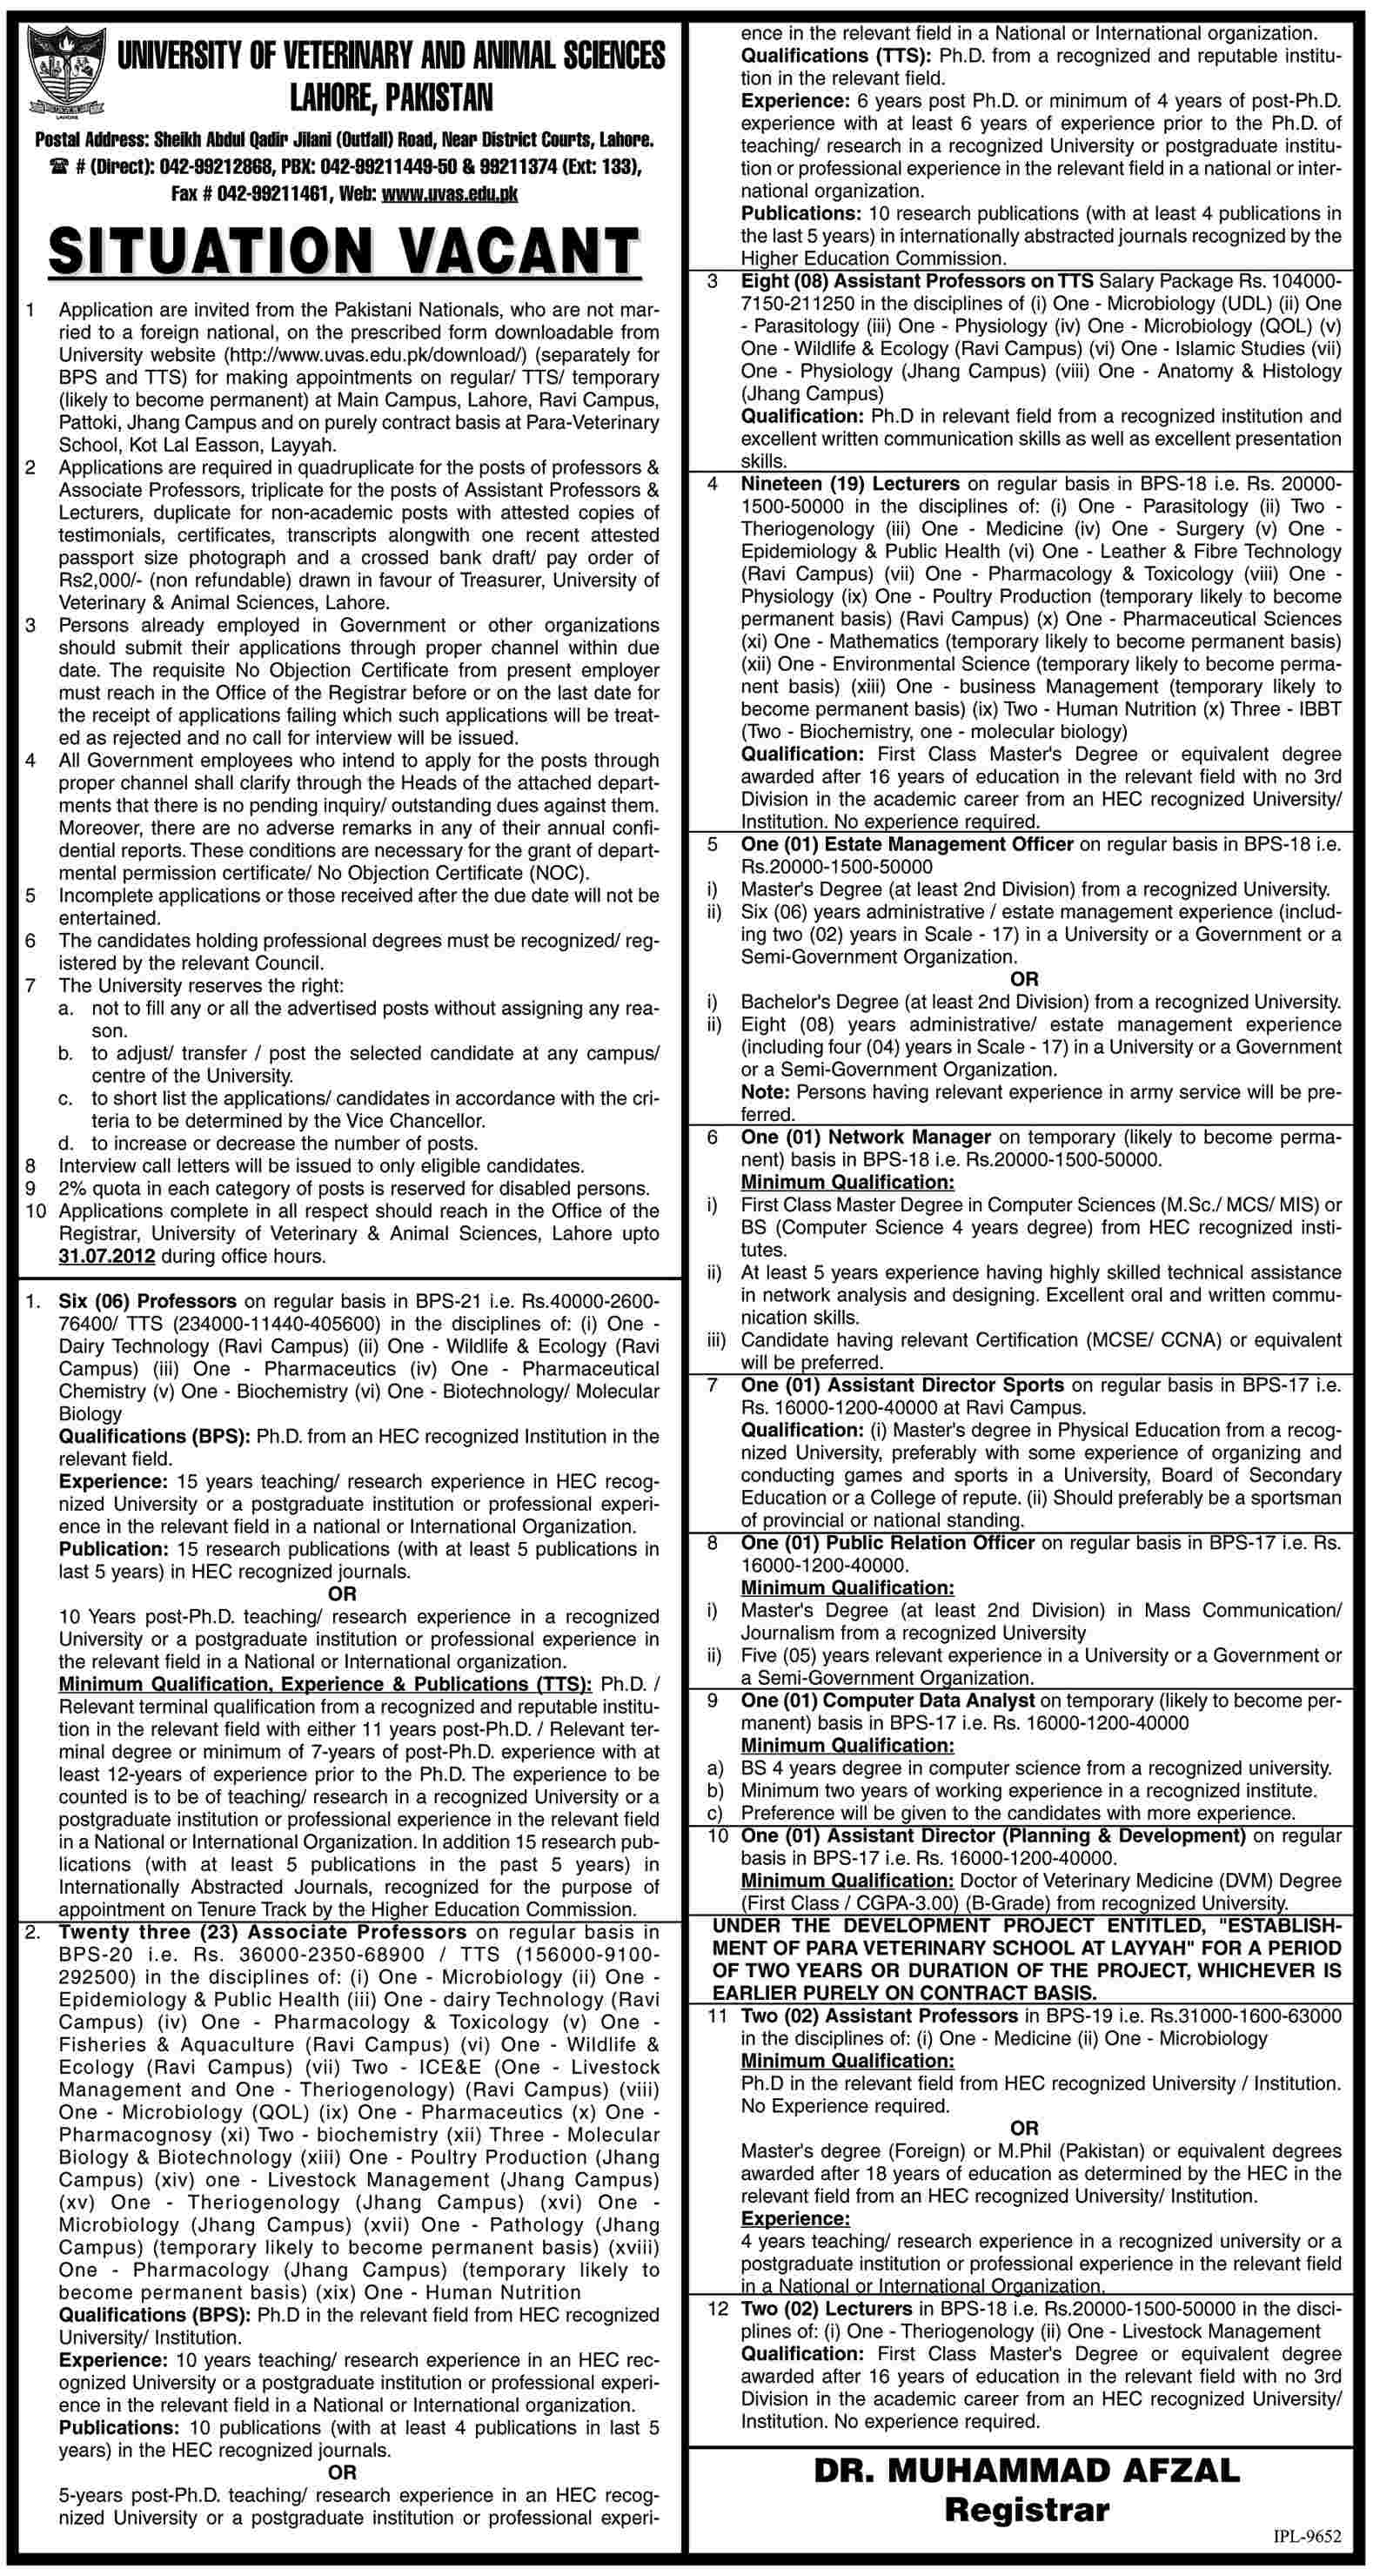 University of Veterinary and Animal Sciences Requires Teaching and Non-Teaching Staff (Government Job)